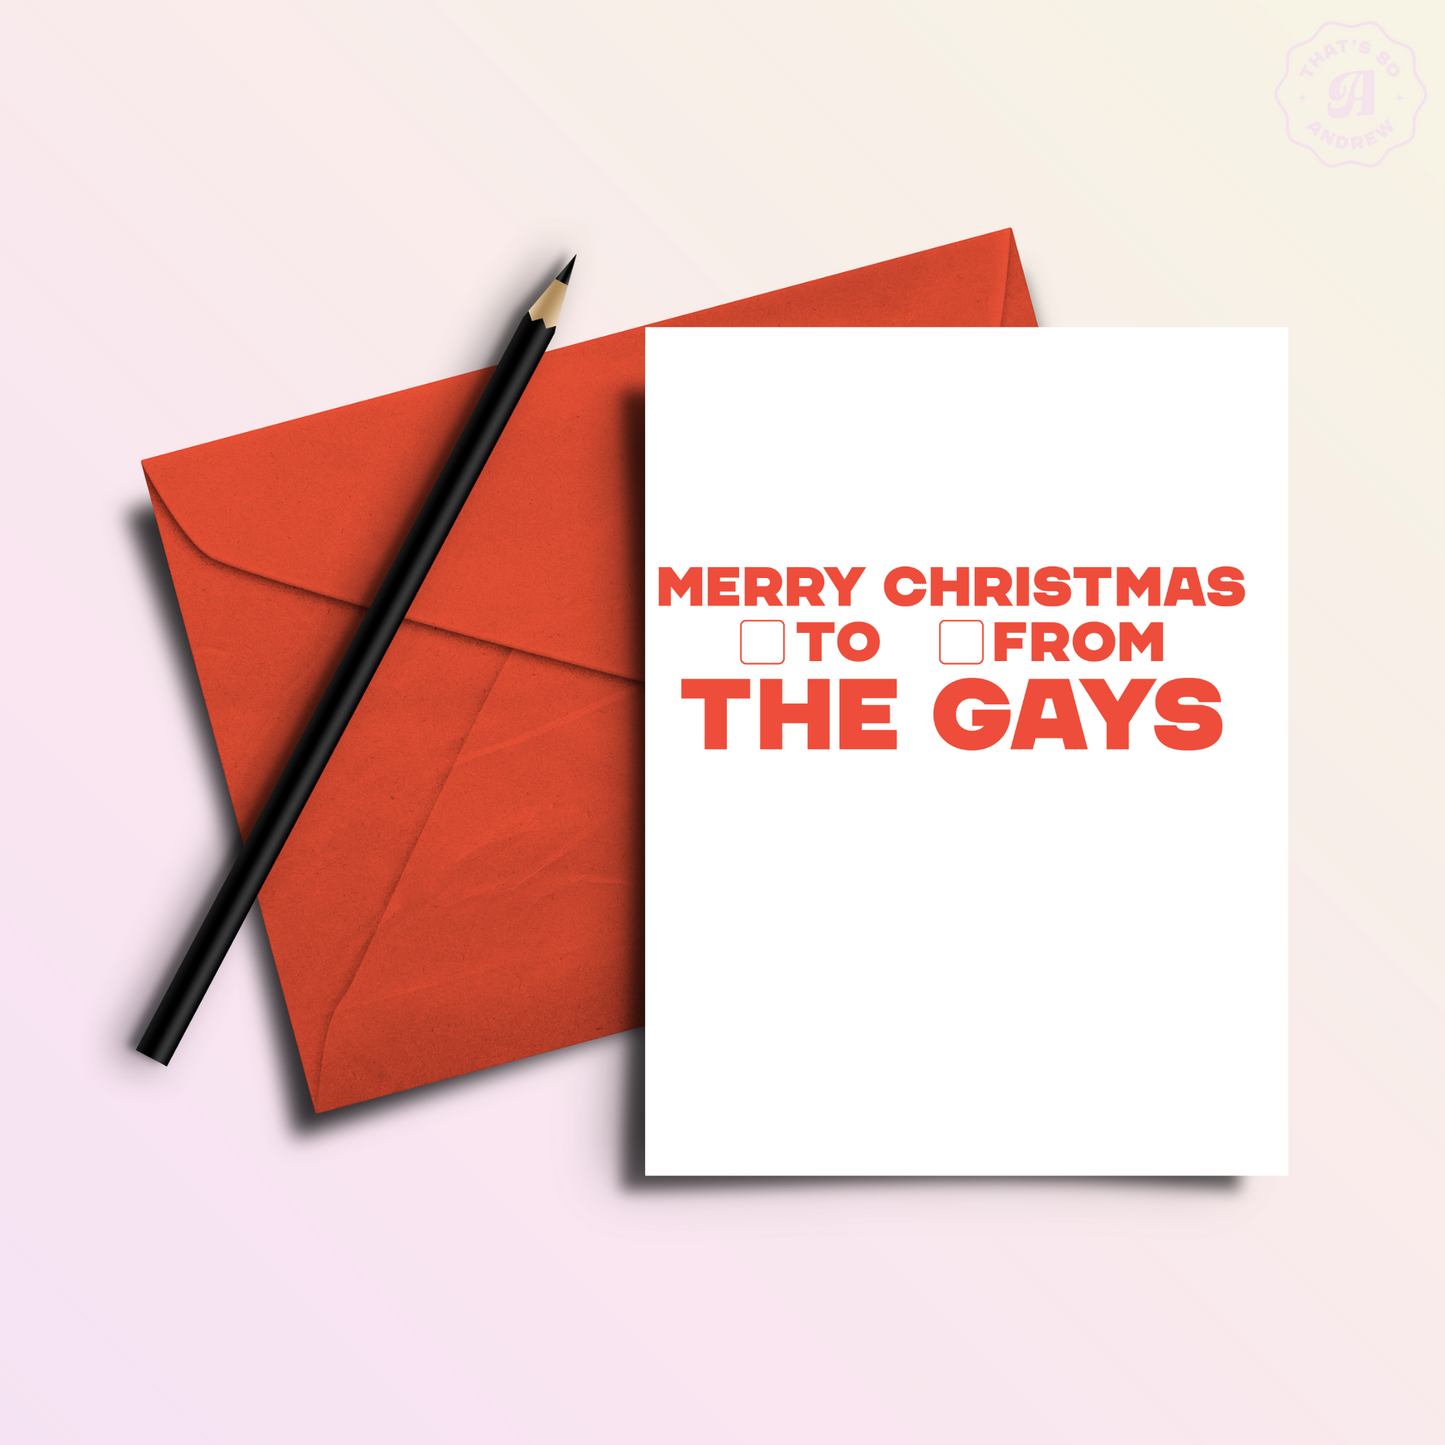 To/From the Gays | Funny Holiday & Christmas Greeting Card